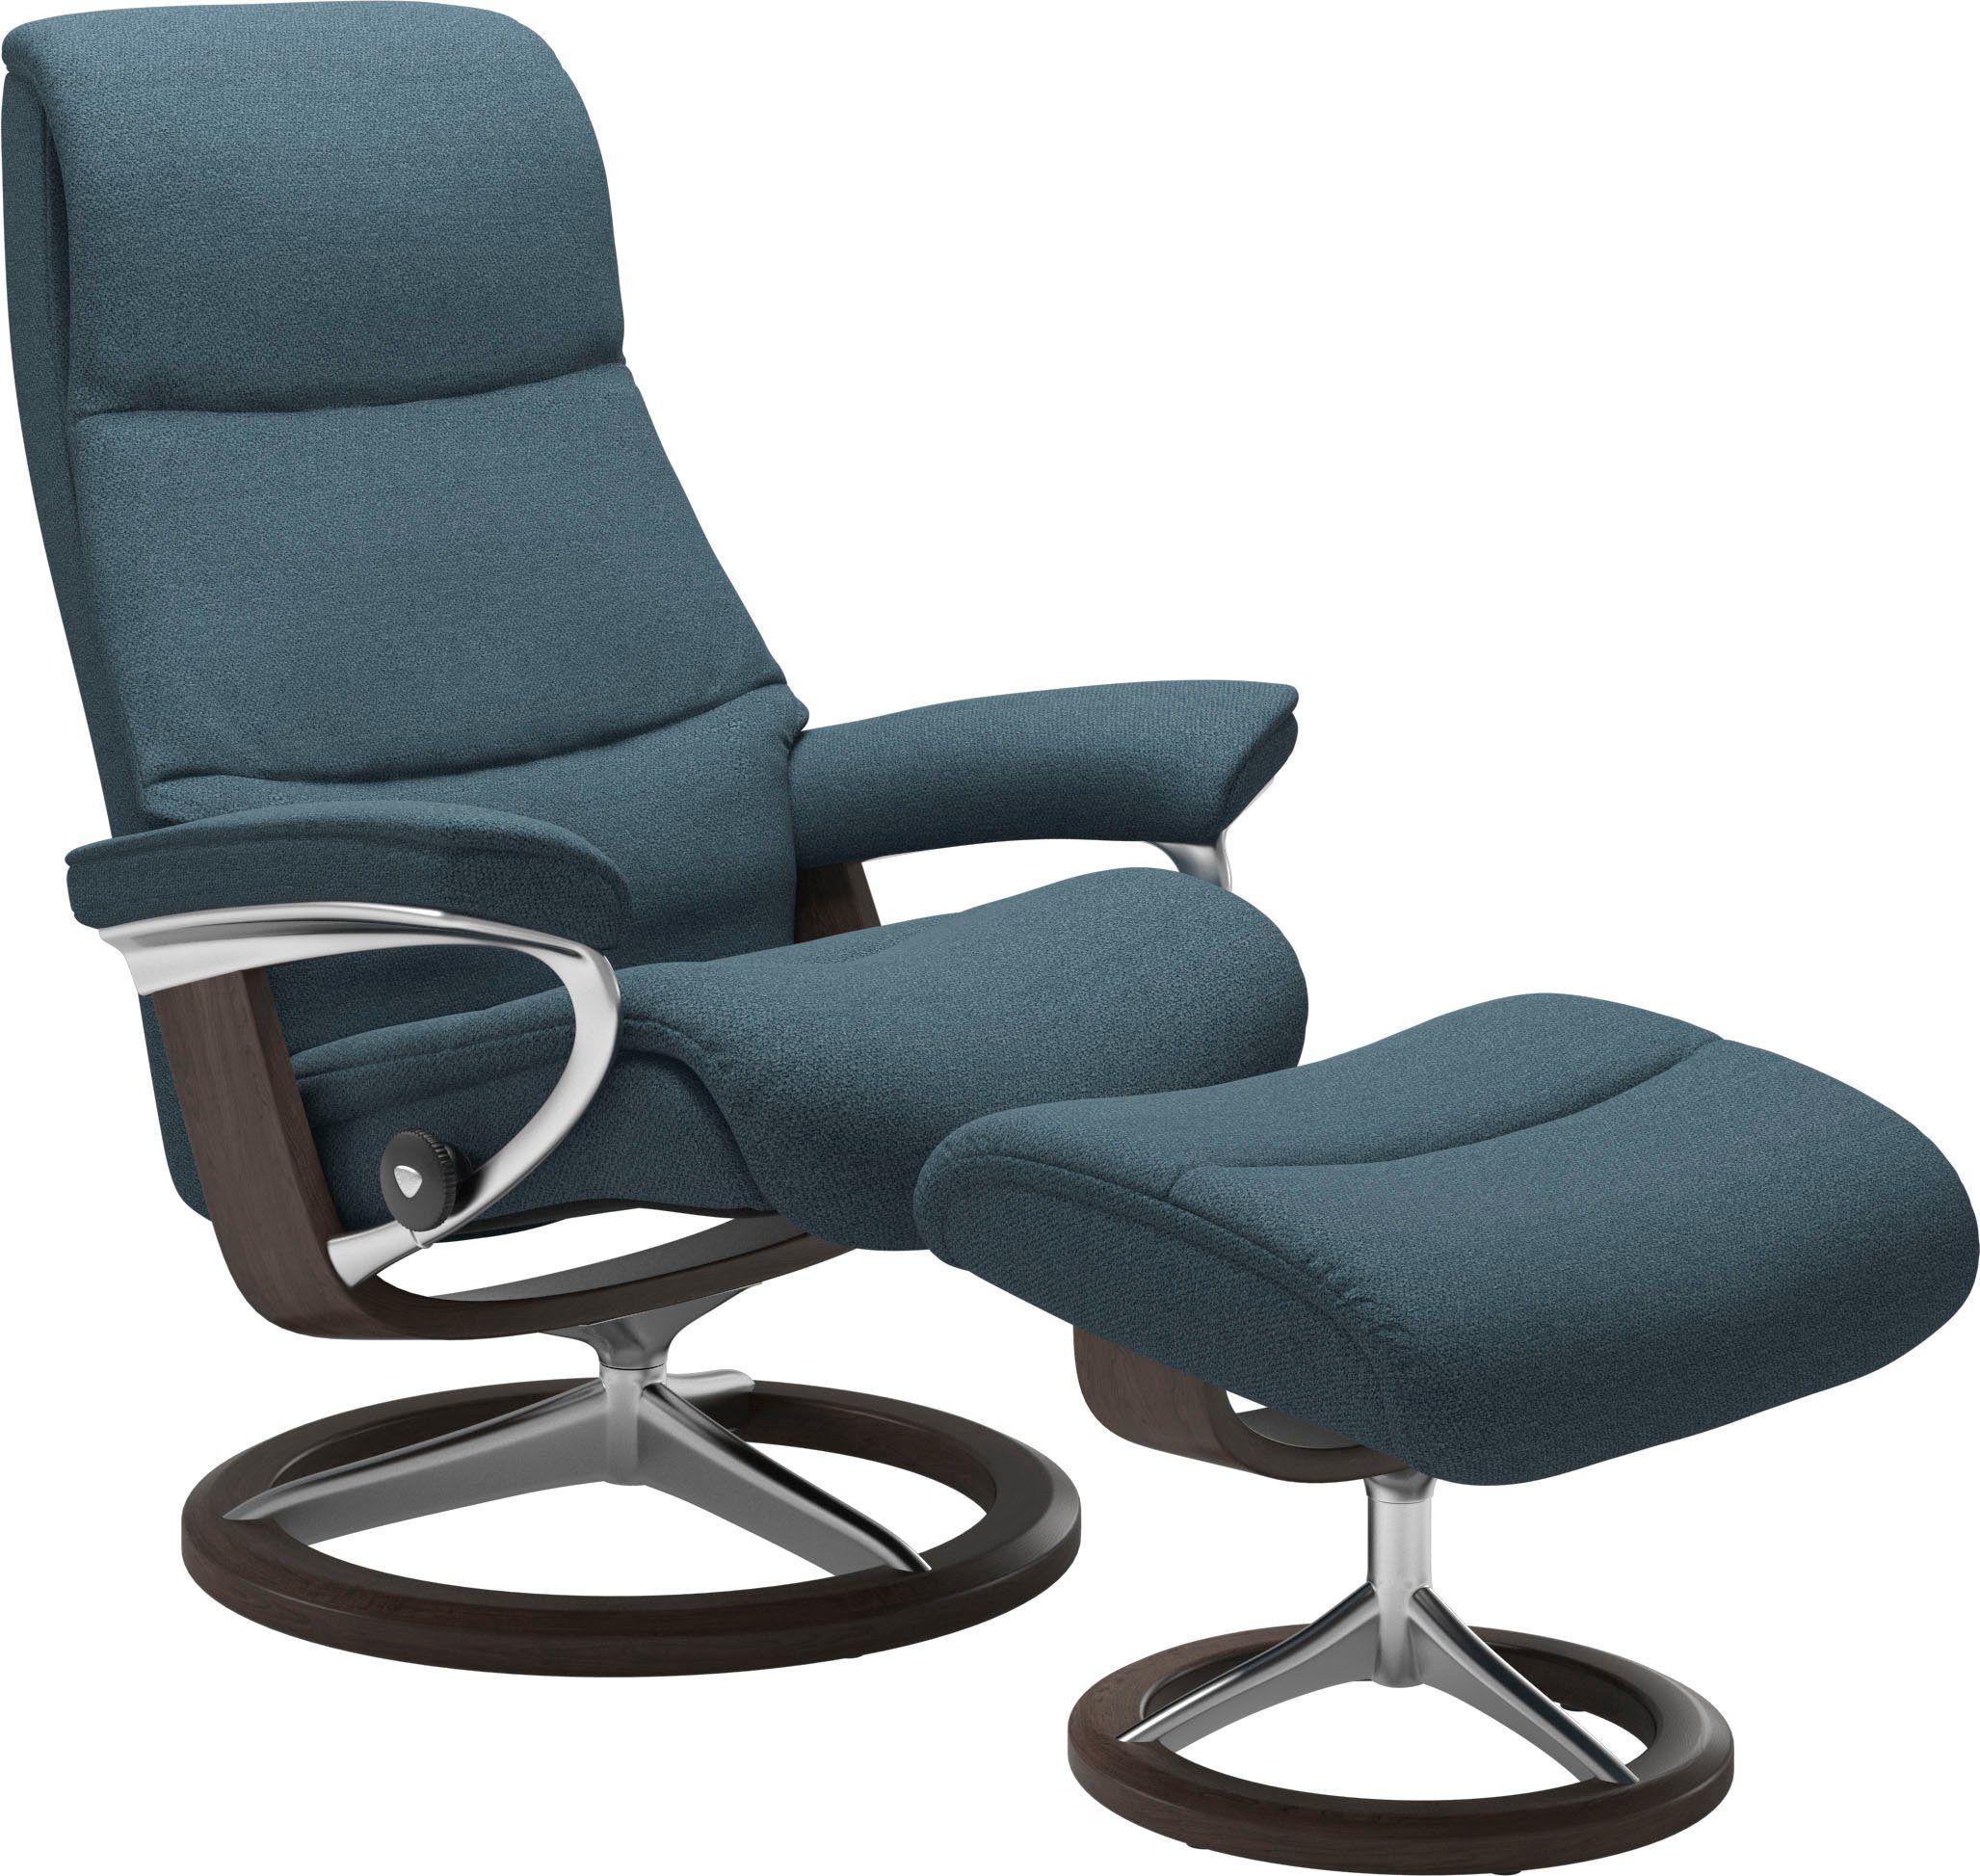 View, Wenge L,Gestell mit Signature Stressless® Base, Relaxsessel Größe